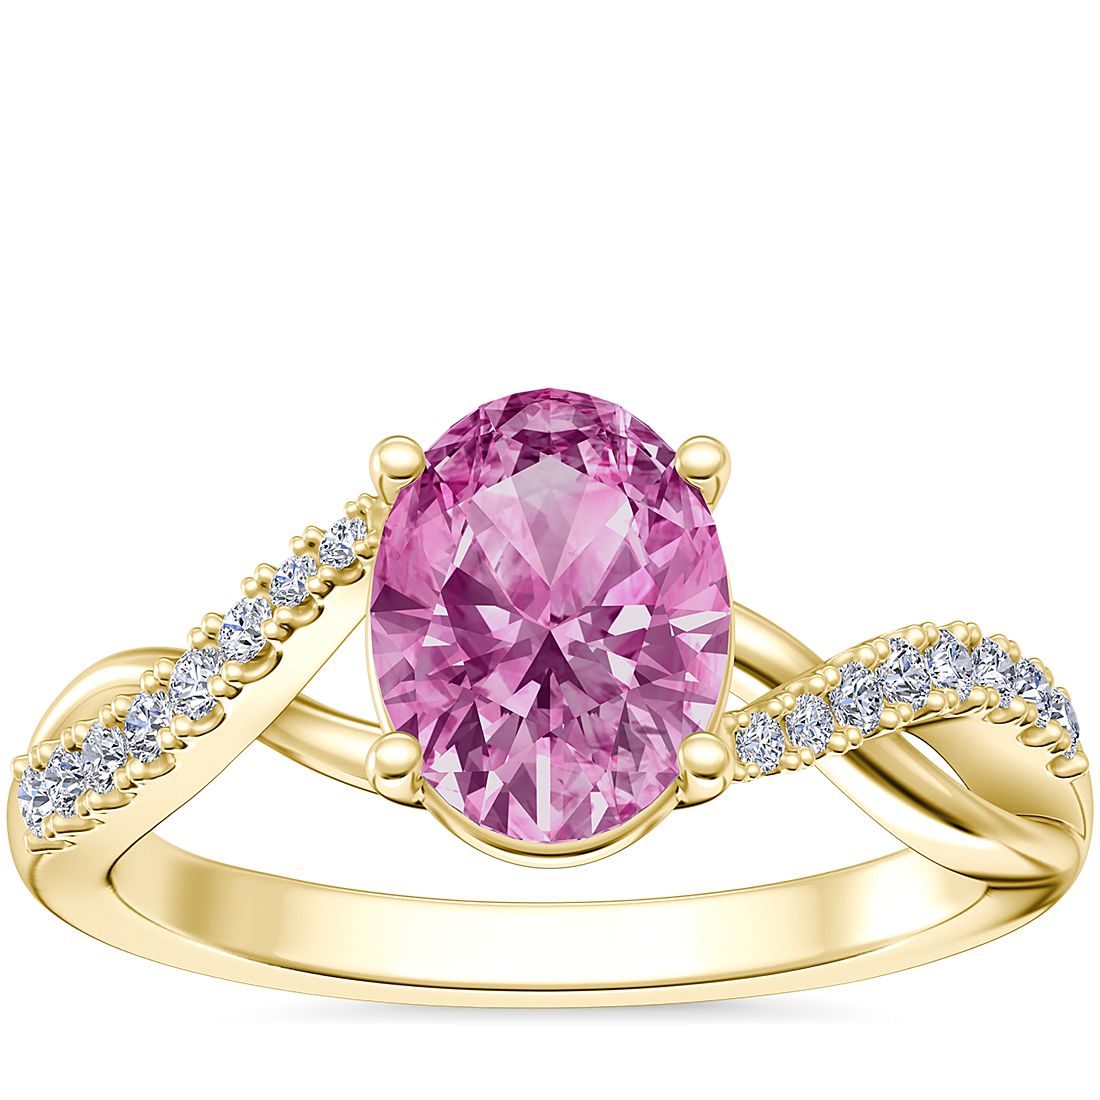 Classic Petite Twist Diamond Engagement Ring with Oval Pink Sapphire in 18k Yellow Gold (8x6mm)